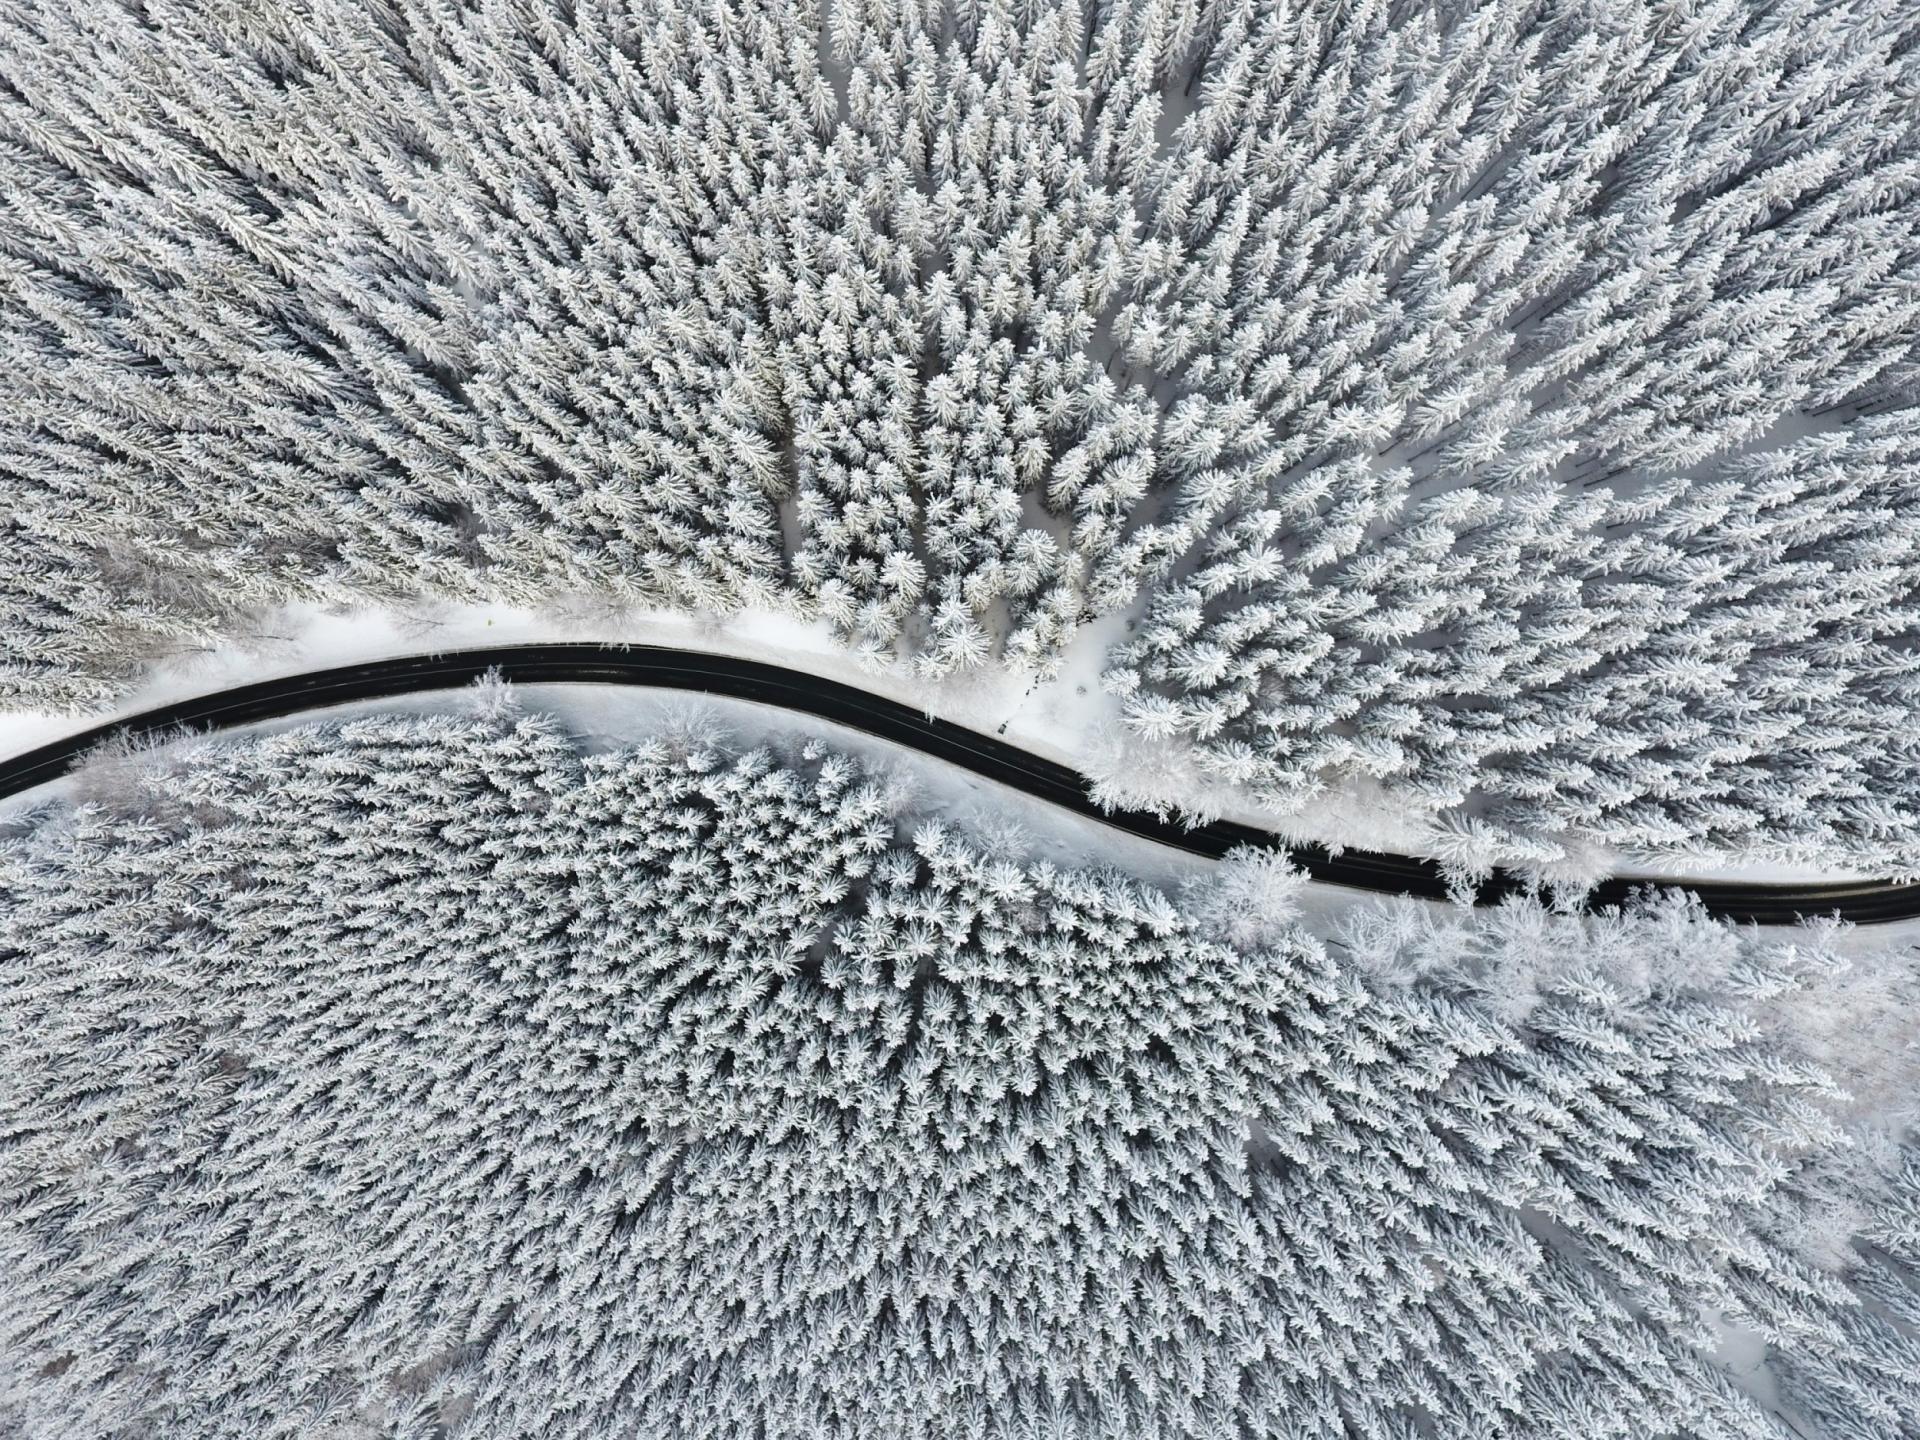 New York Photography Awards Winner - A Cold Road